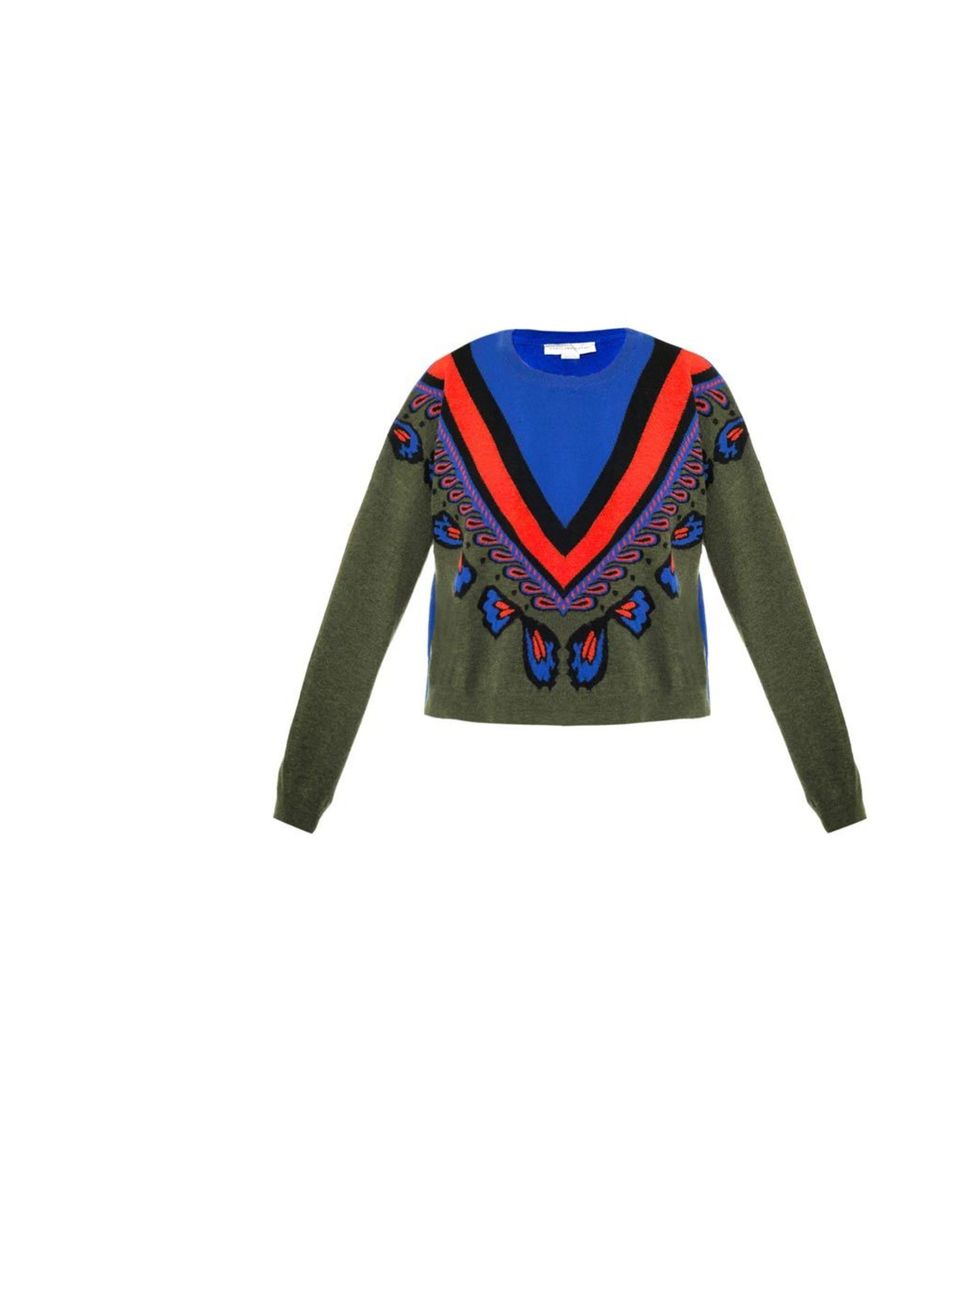 <p>Stella McCartney cropped sweater, £535, at <a href="http://www.matchesfashion.com/product/127512">Matches Fashion</a></p>